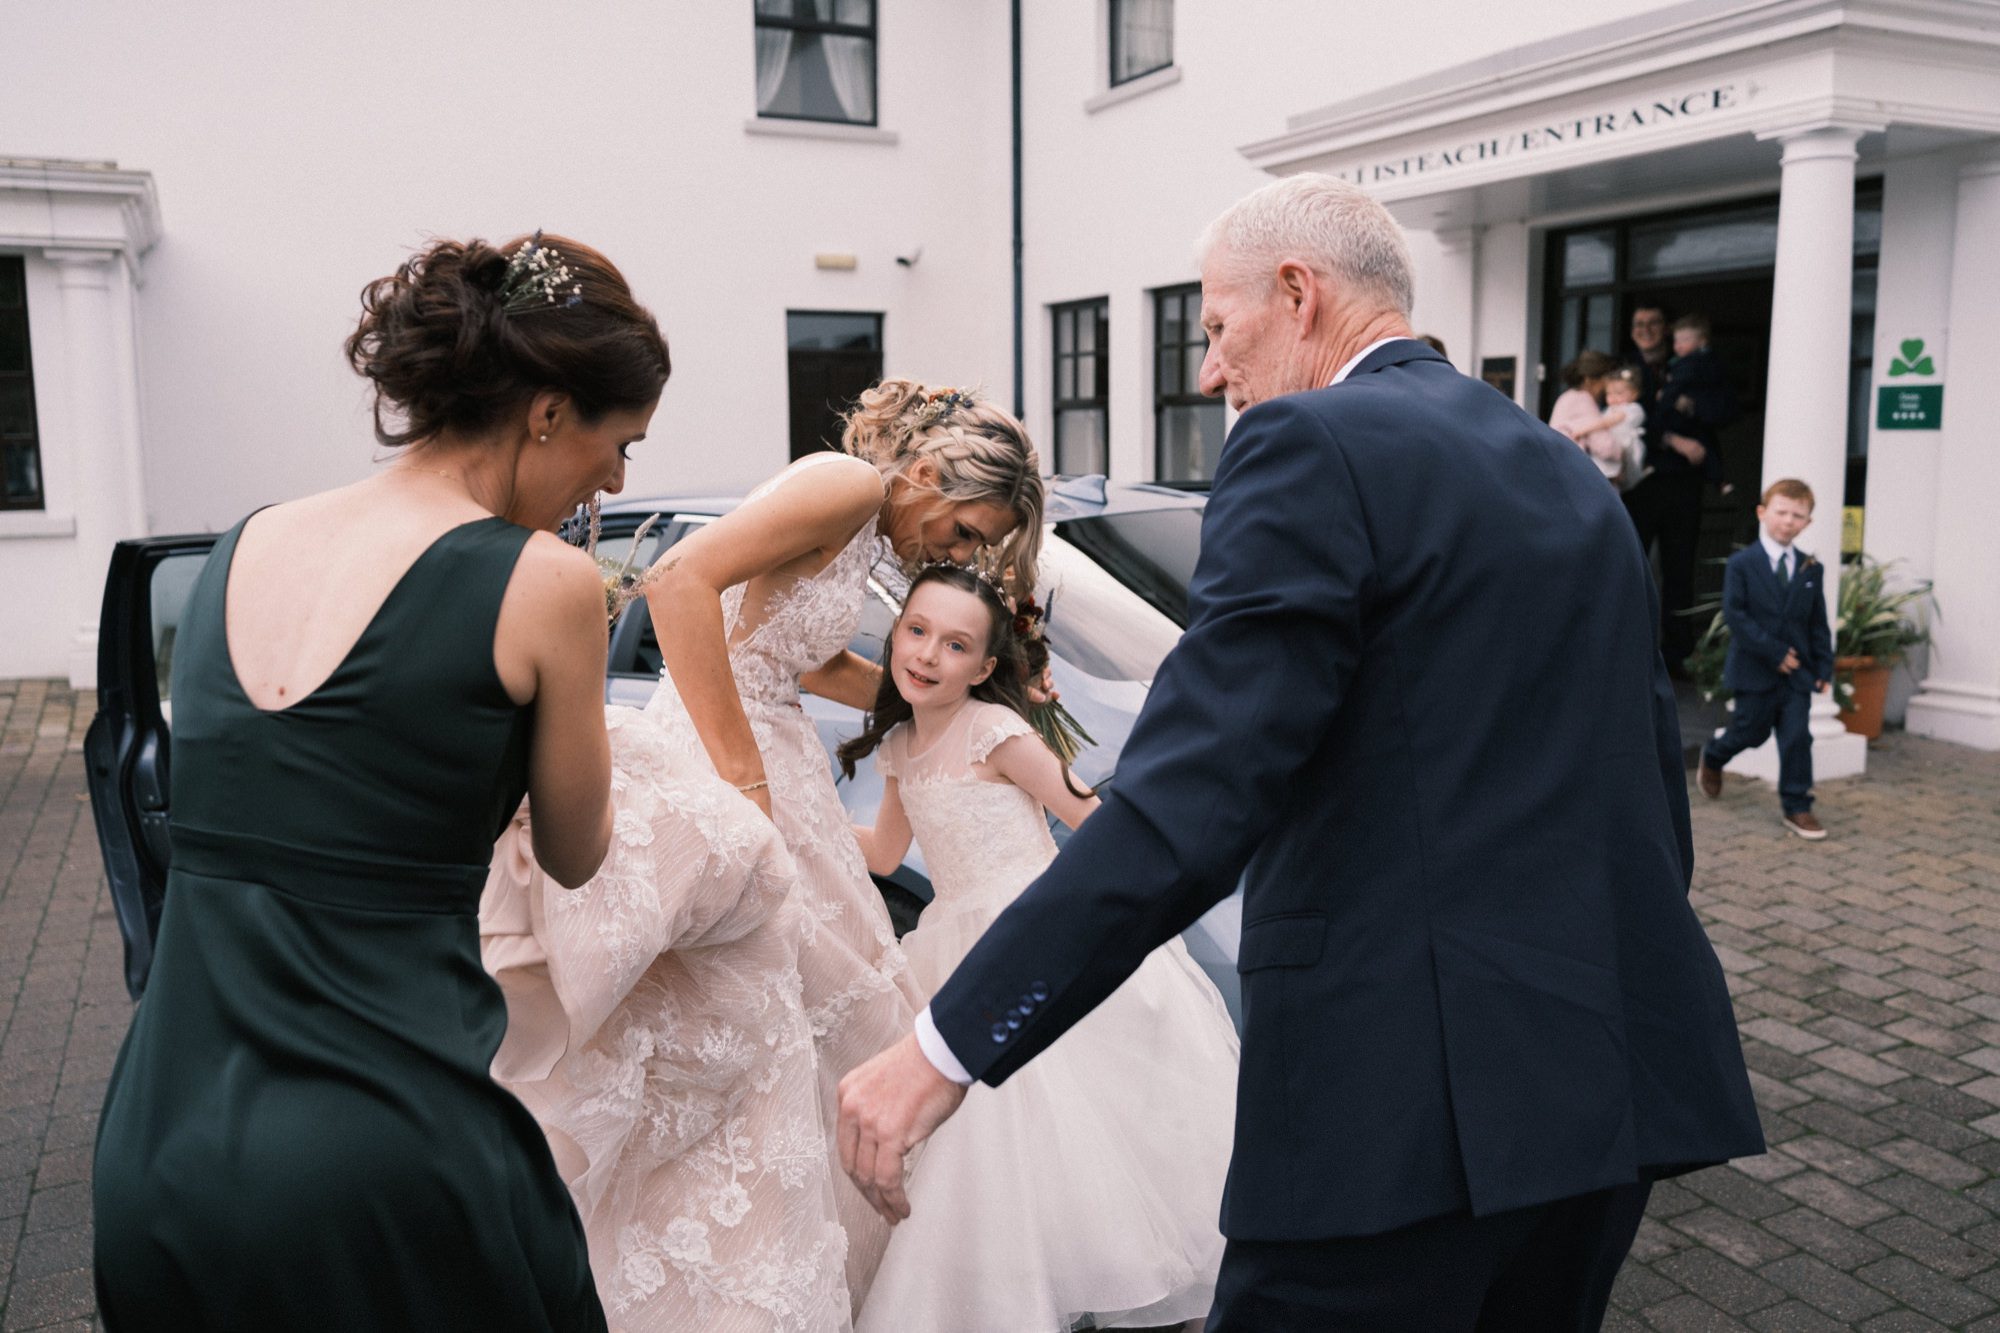 Wedding photography that lets you stay in the moment